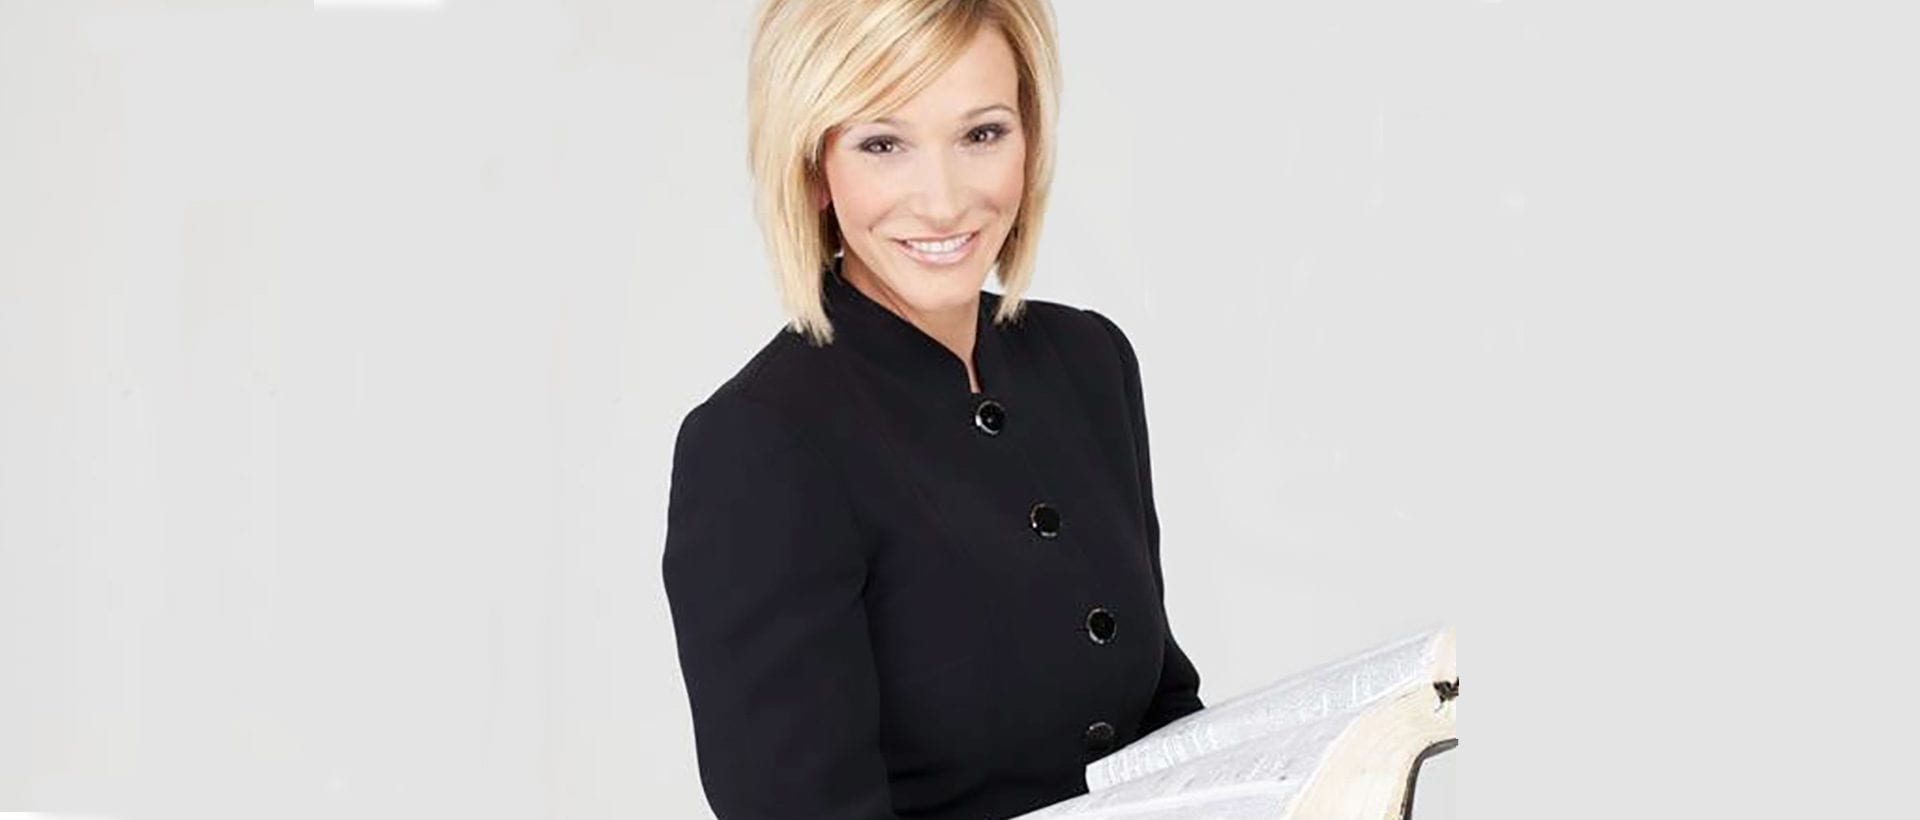 HOPE for Prisoners, Inc. in Las Vegas, NV announces Pastor Paula White will join the Board of Directors of the nonprofit reentry organization